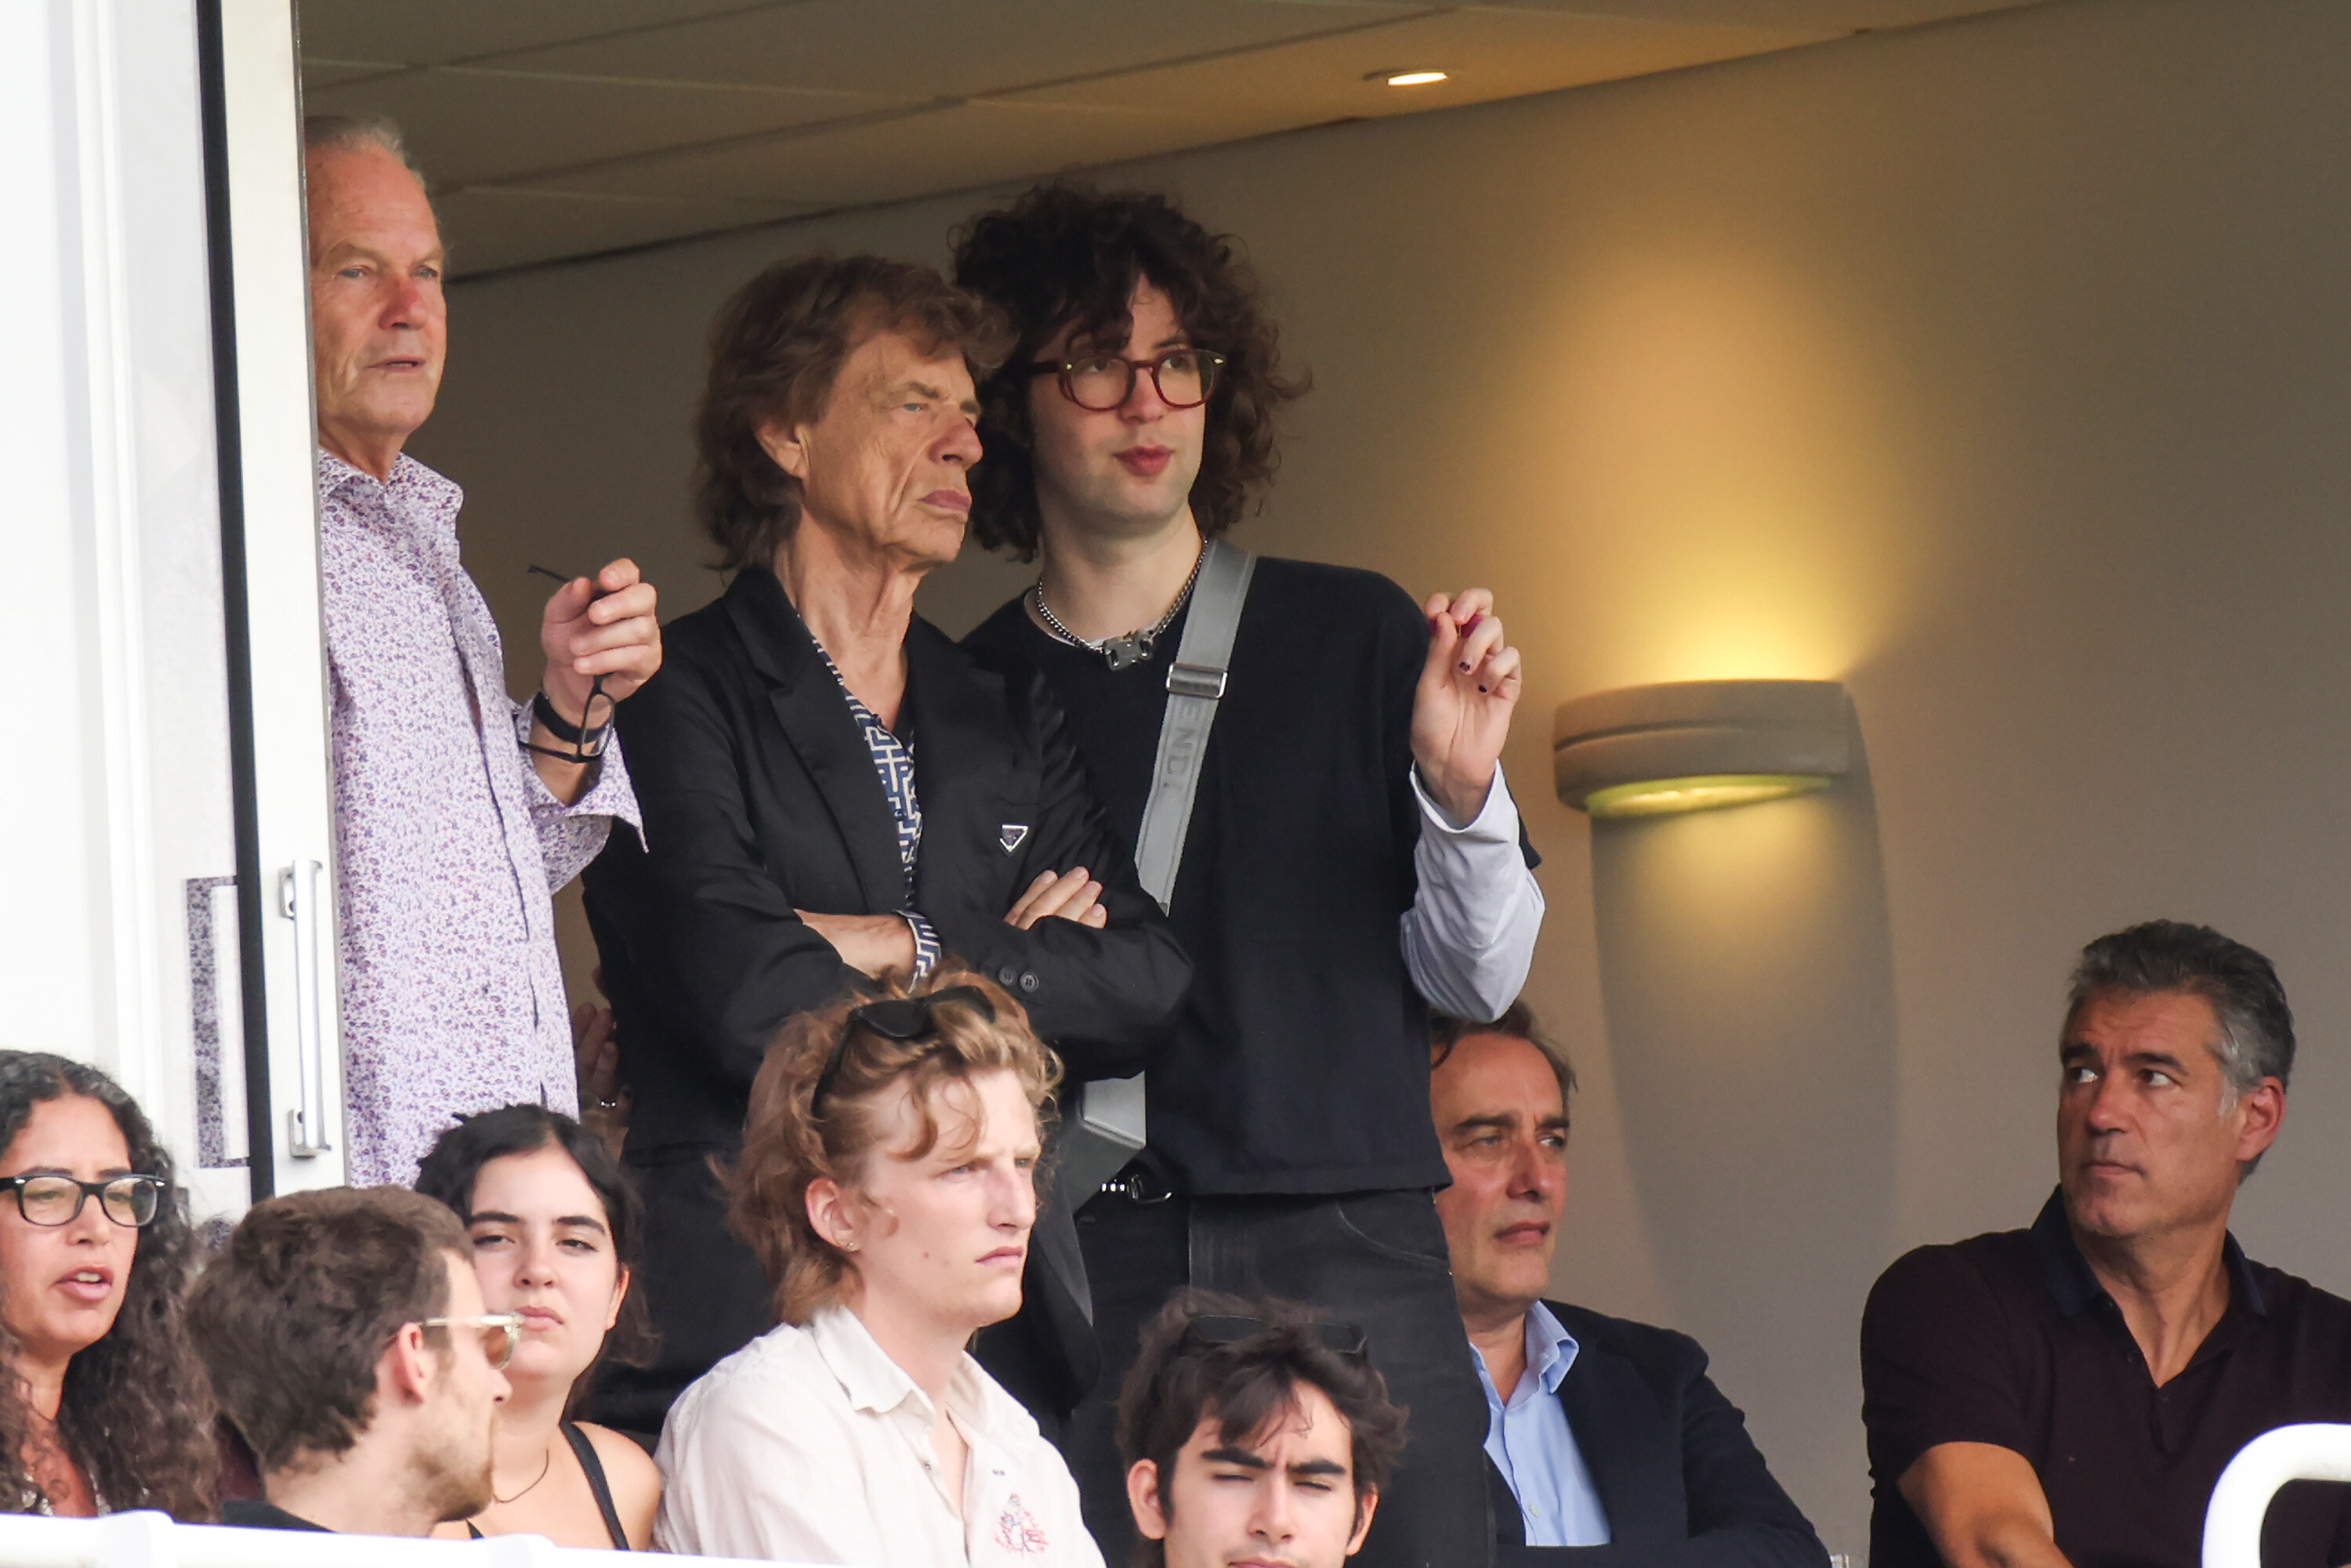 Mick Jagger Gets Trolled By His Son And It's A Gas, Gas, Gas